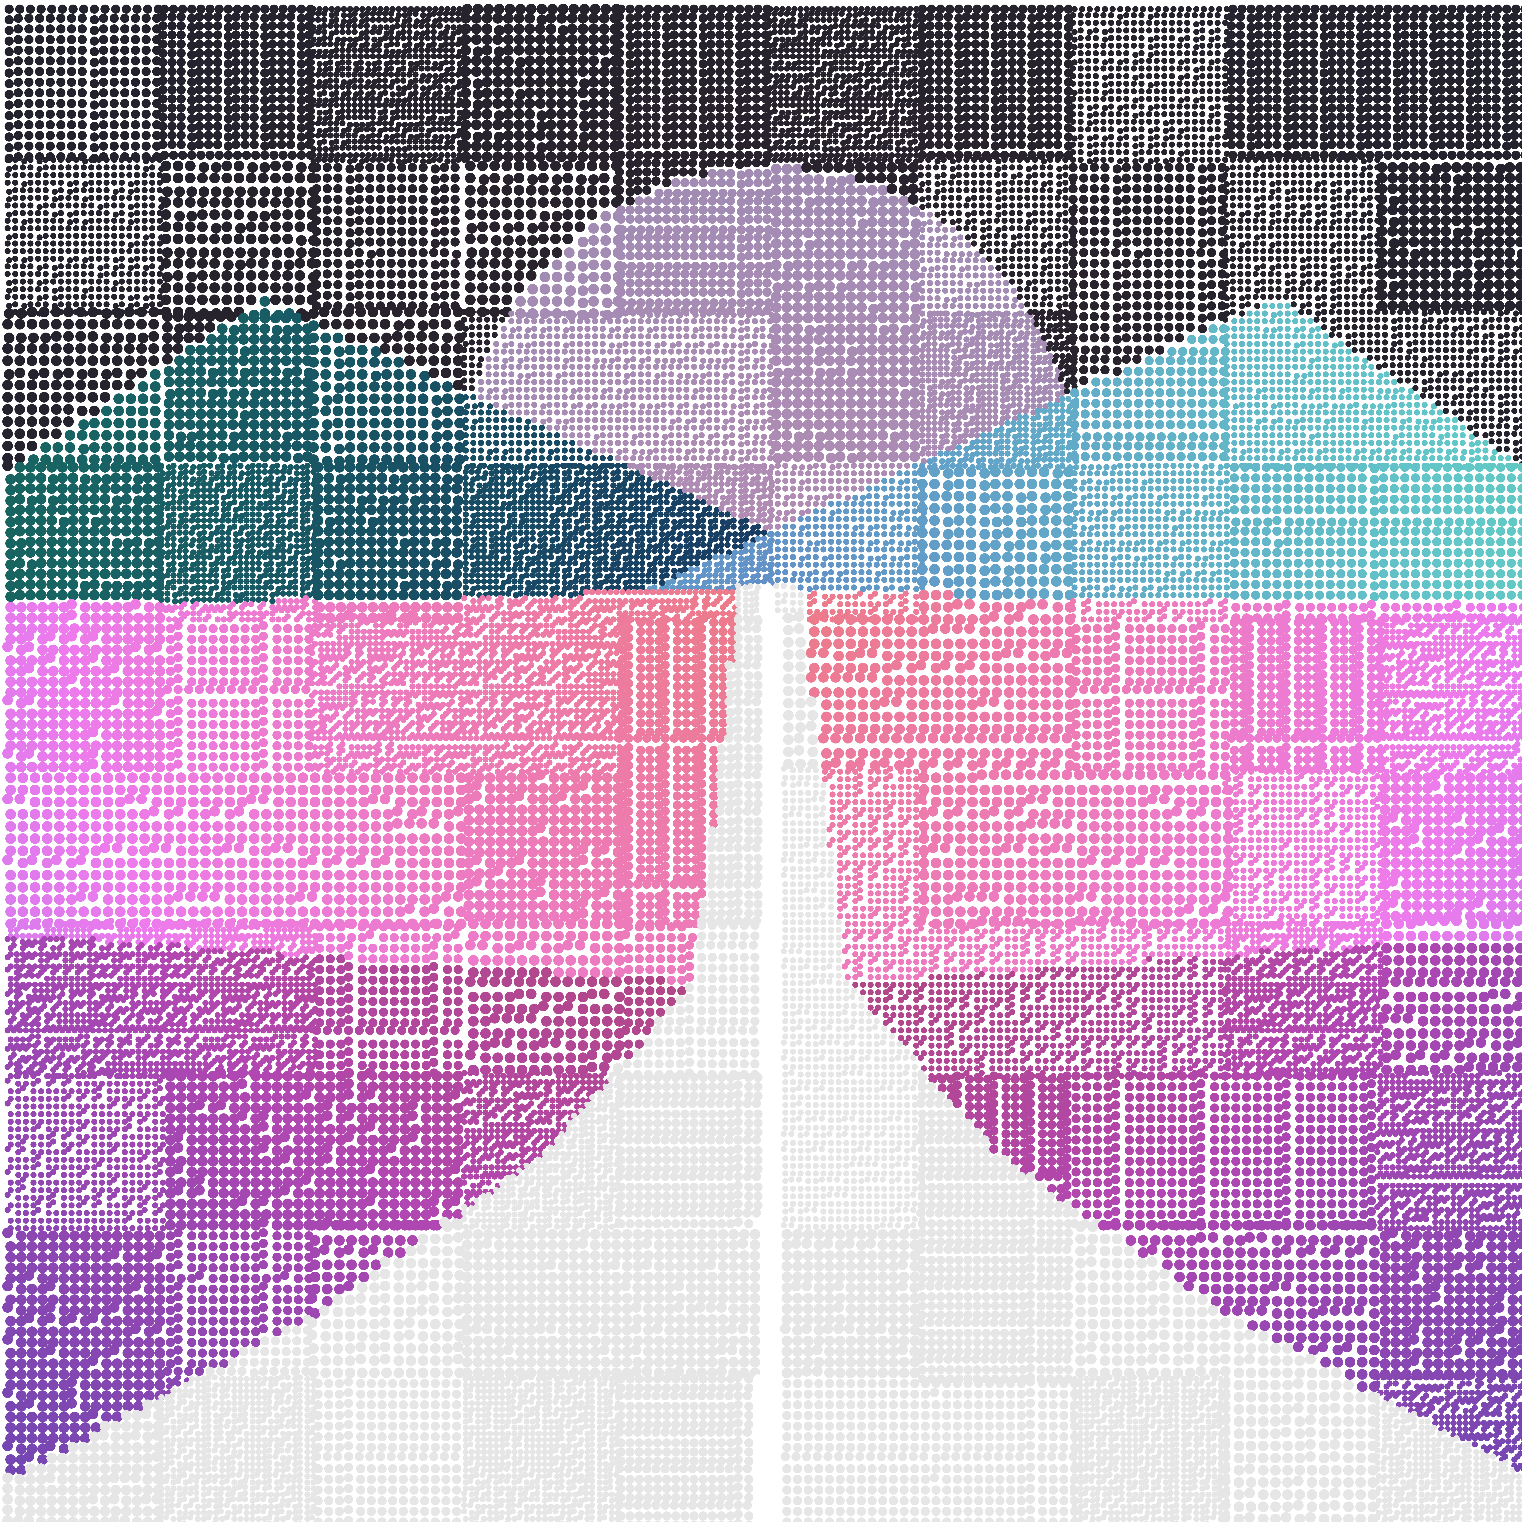 Sonoran Roadways 'Salmon' output (hue gradient blended)